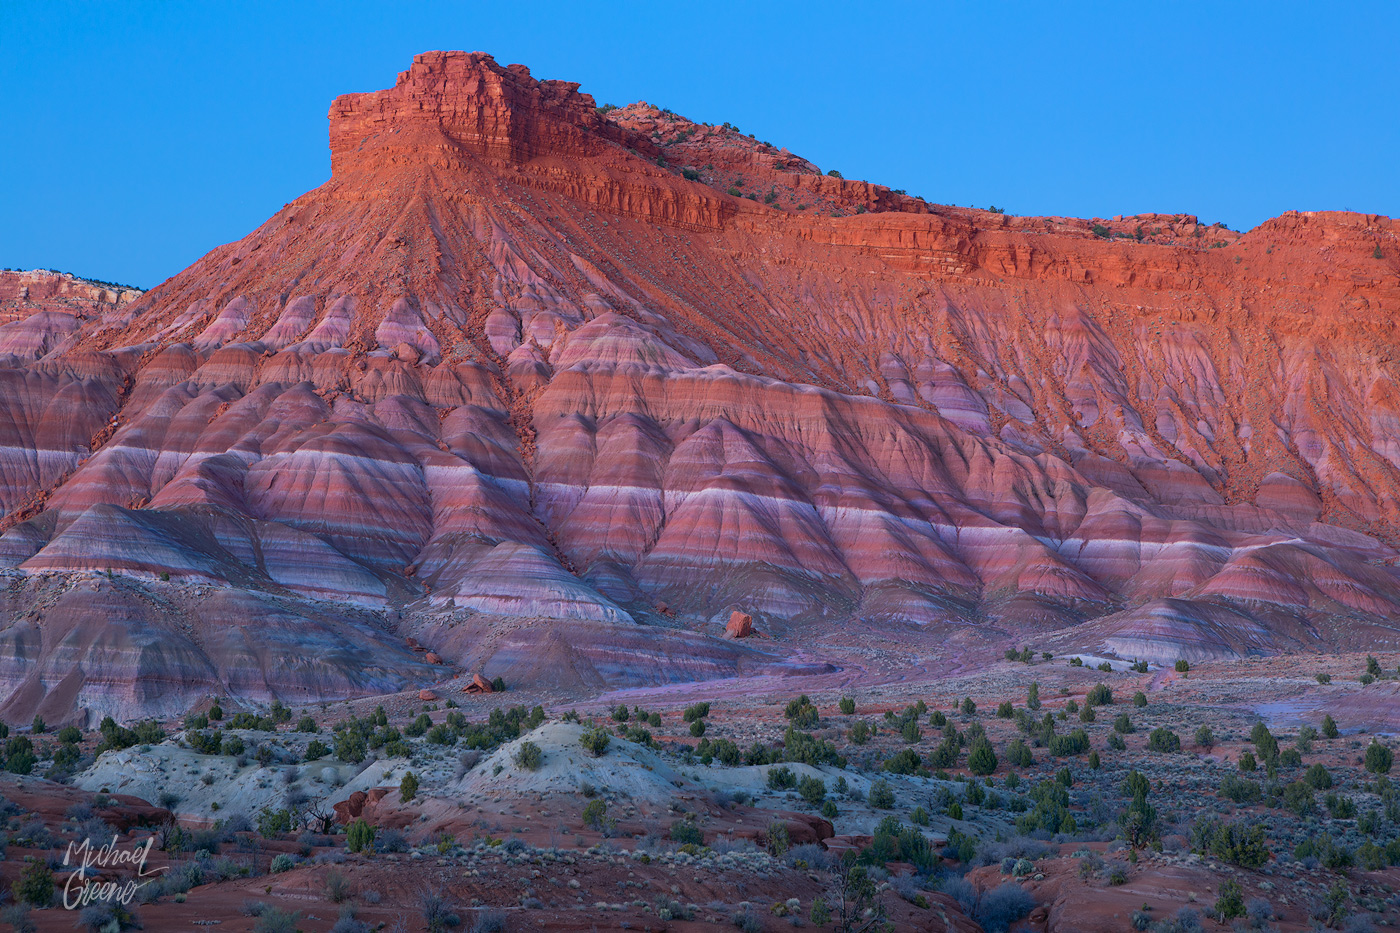 Twilight brings out the amazing colors of the red rock and clay formations in Southern UT and Northern AZ.